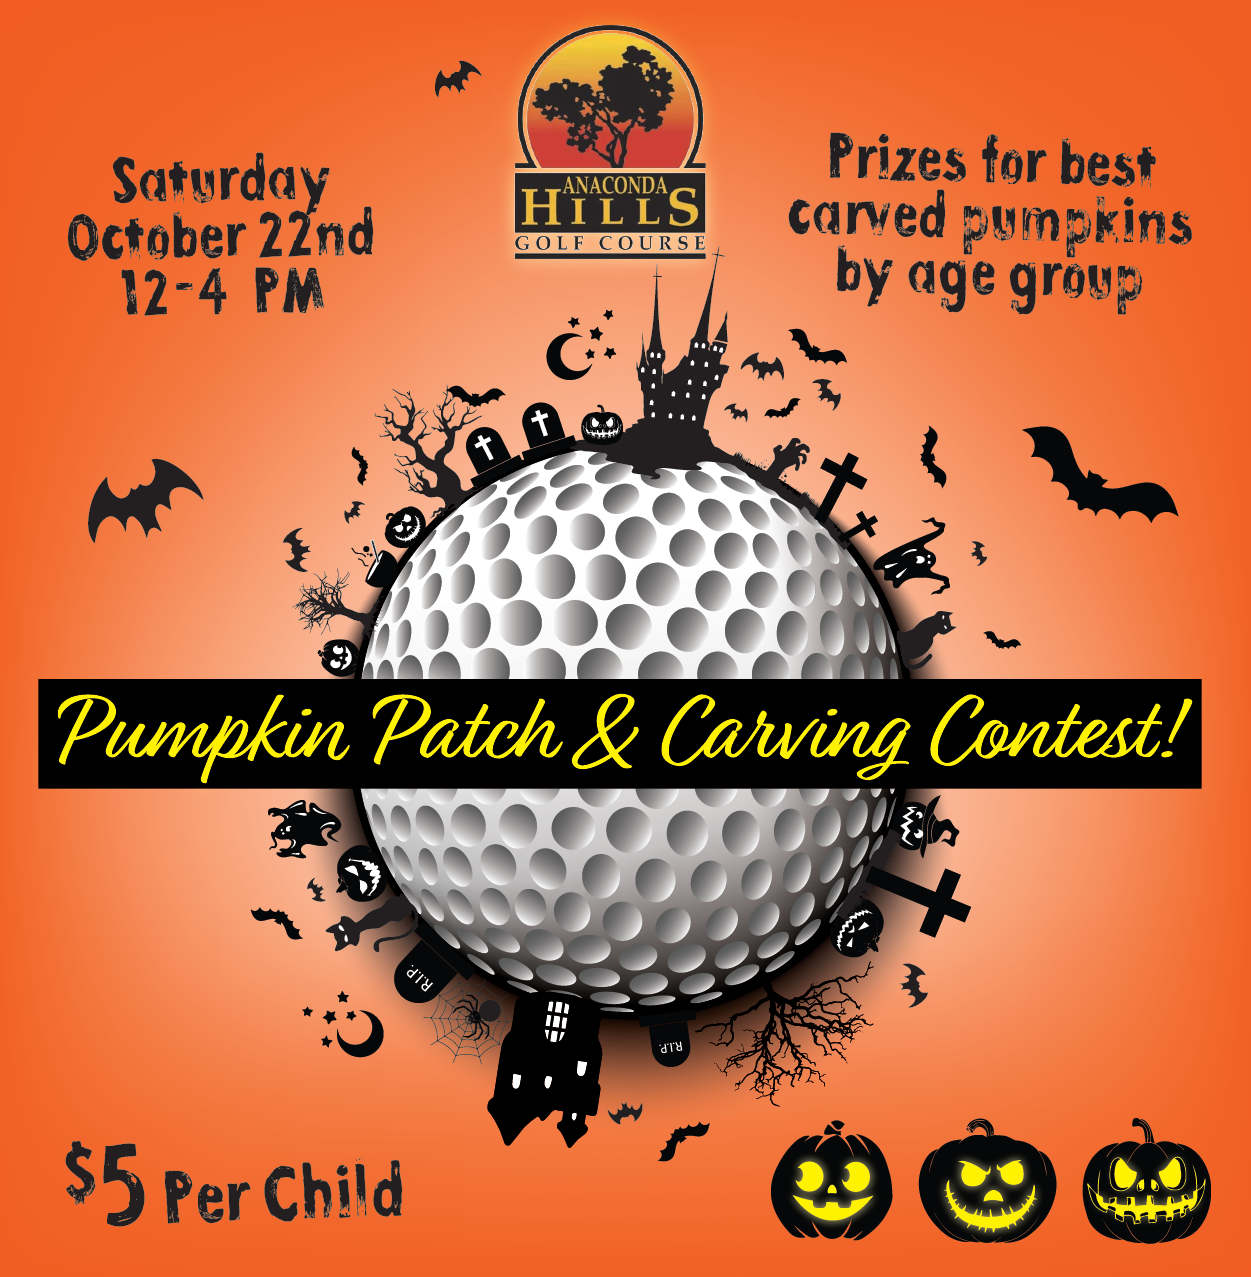 Pumpkin Patch & Carving Contest headline on illustration of golf ball covered with halloween items